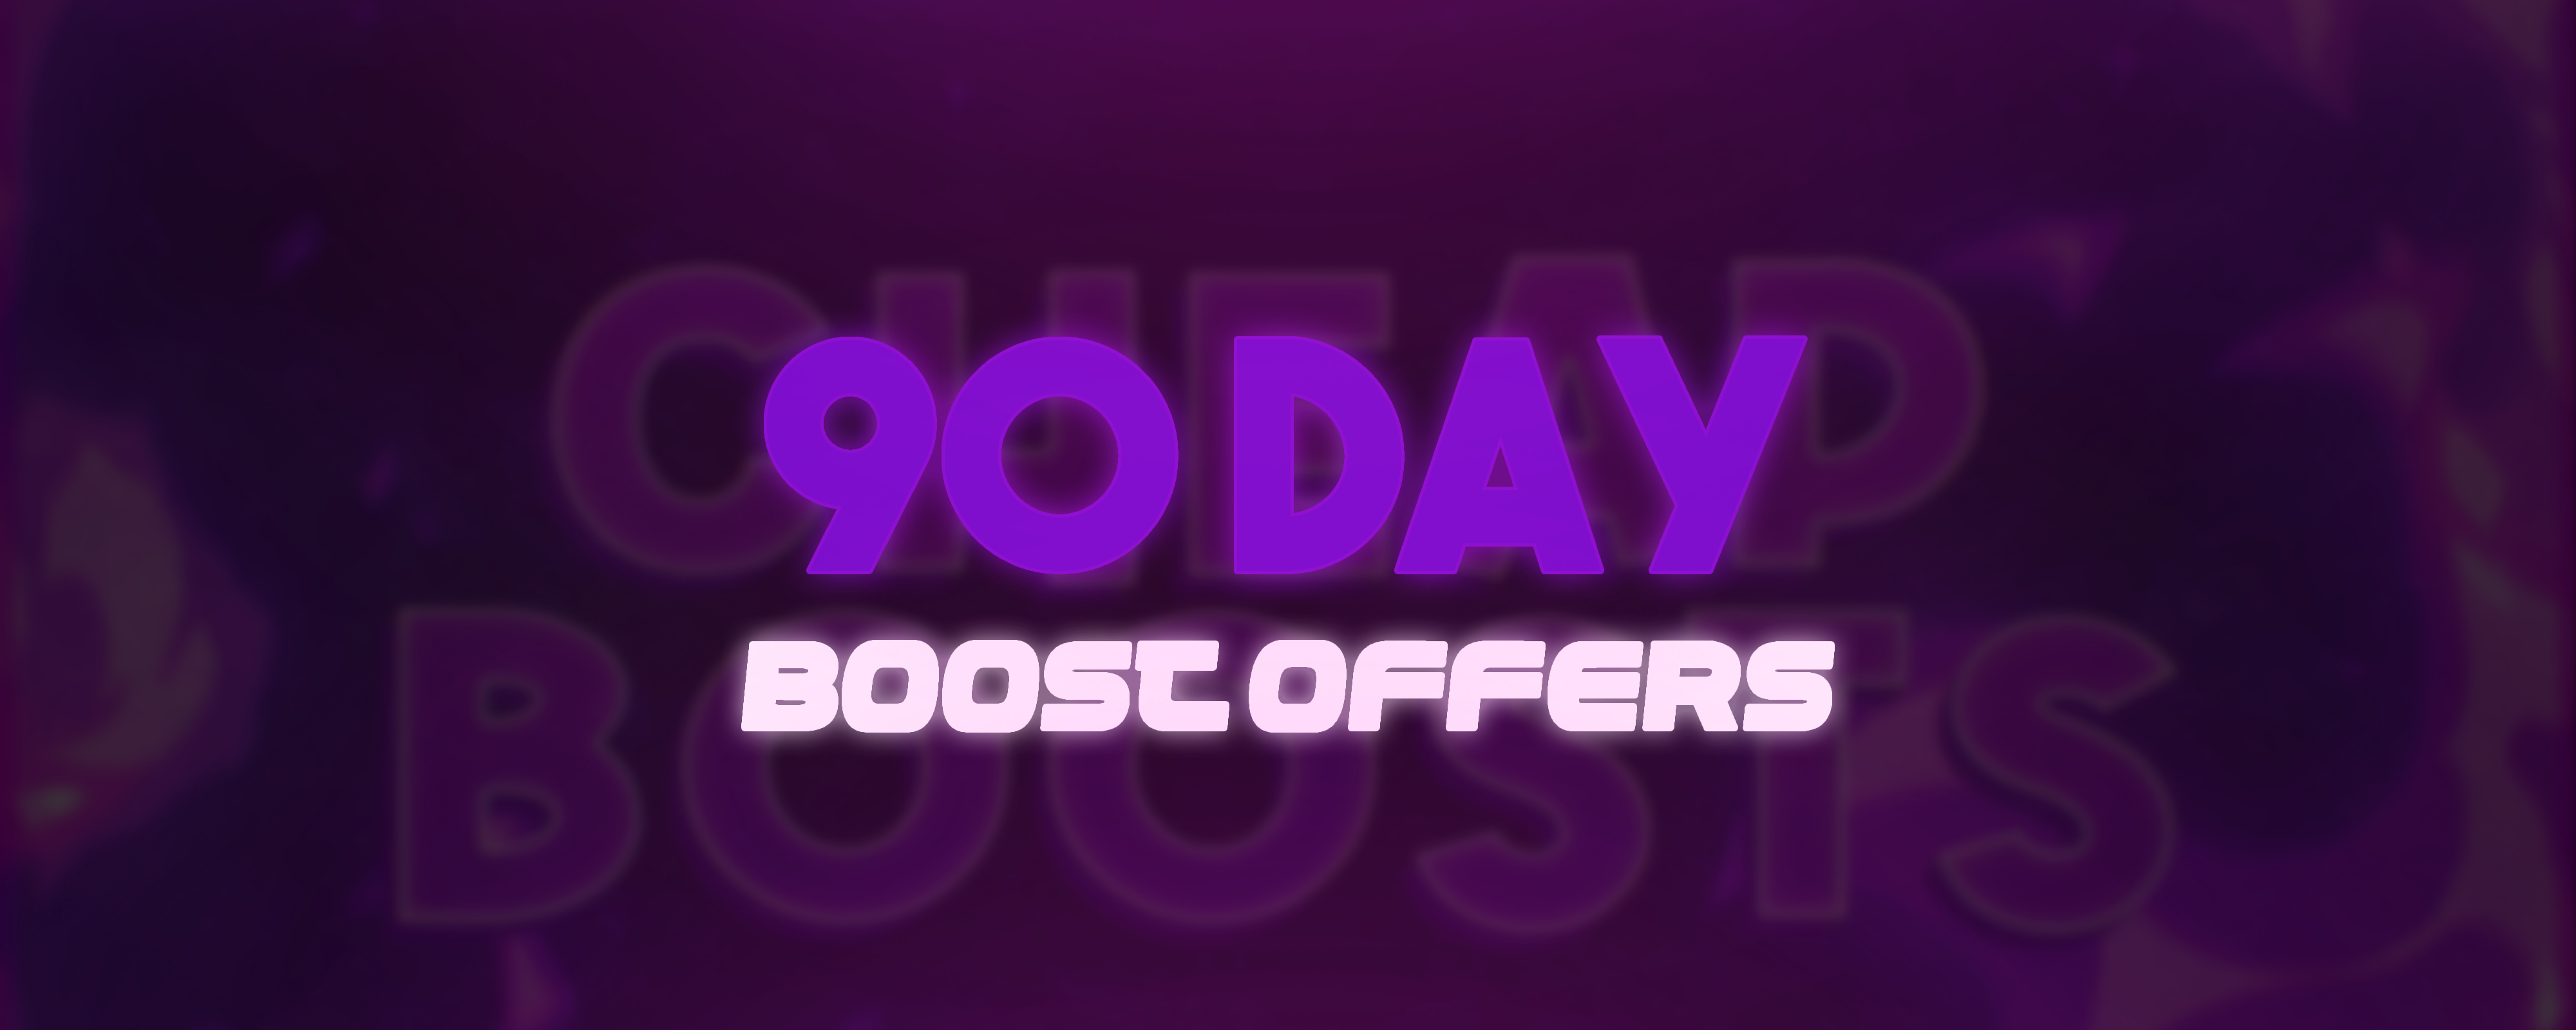 90 Day Boost Offers